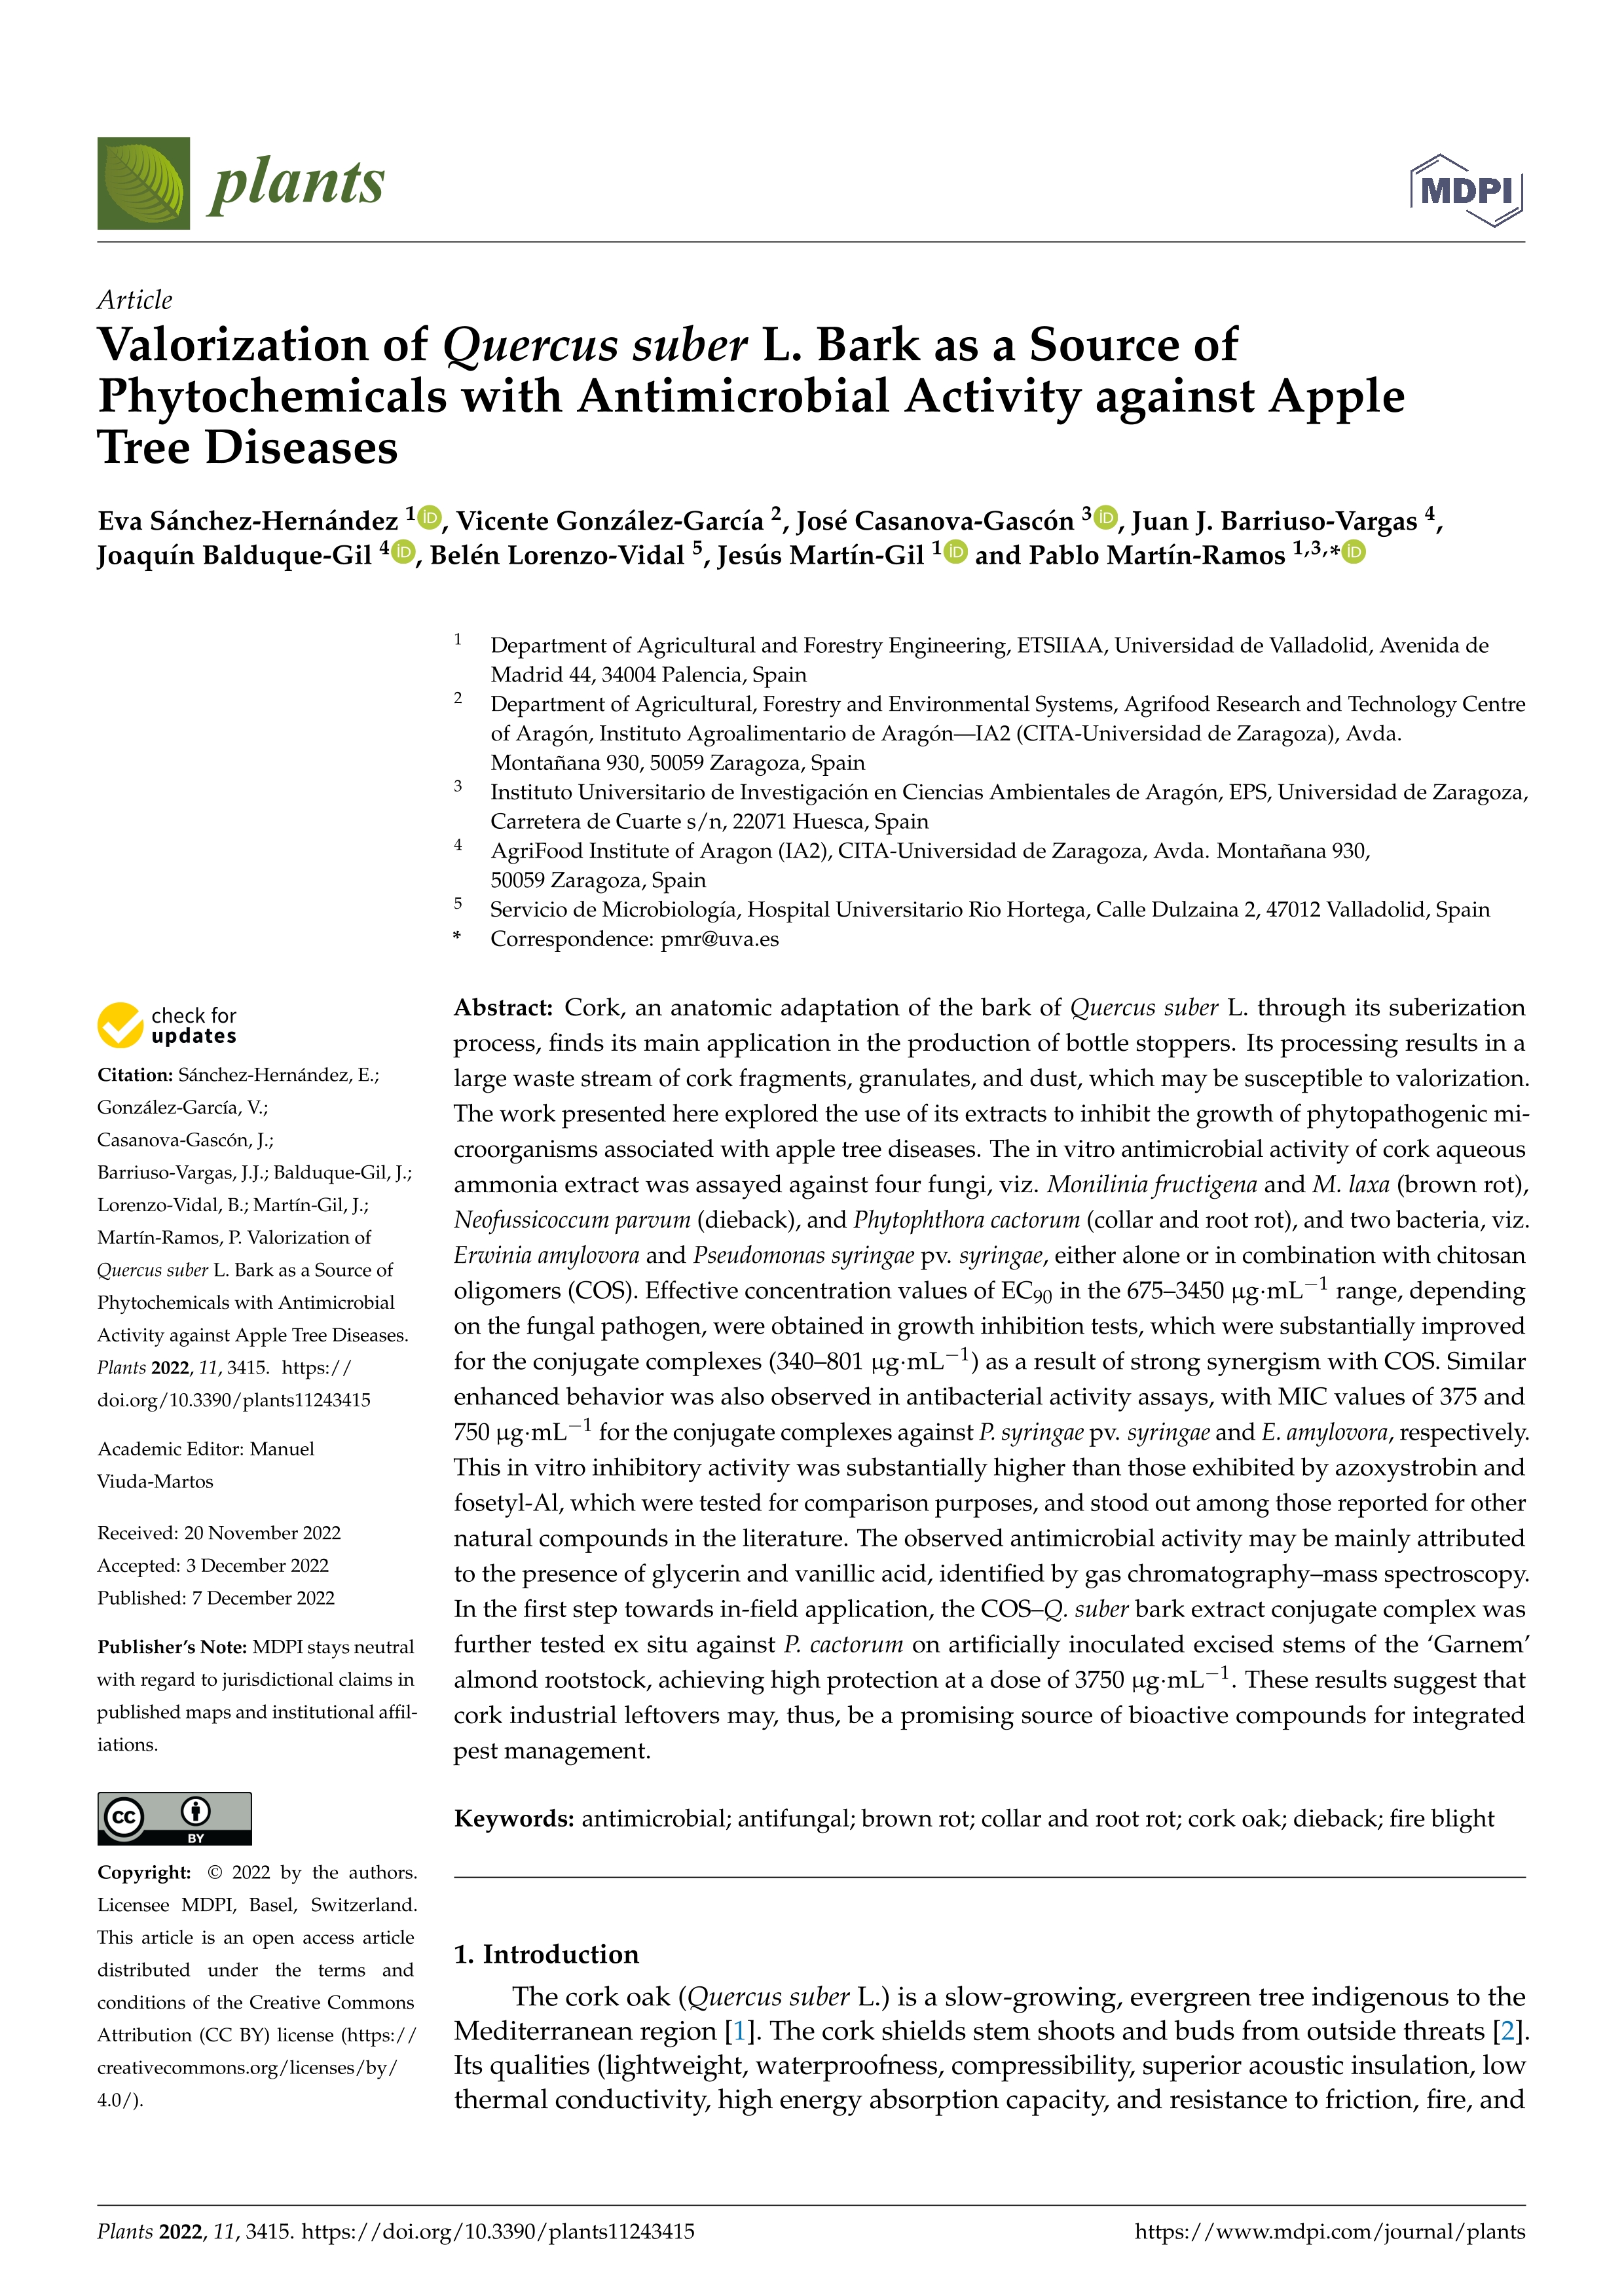 Valorization of Quercus suber L. Bark as a source of phytochemicals with antimicrobial activity against apple tree diseases